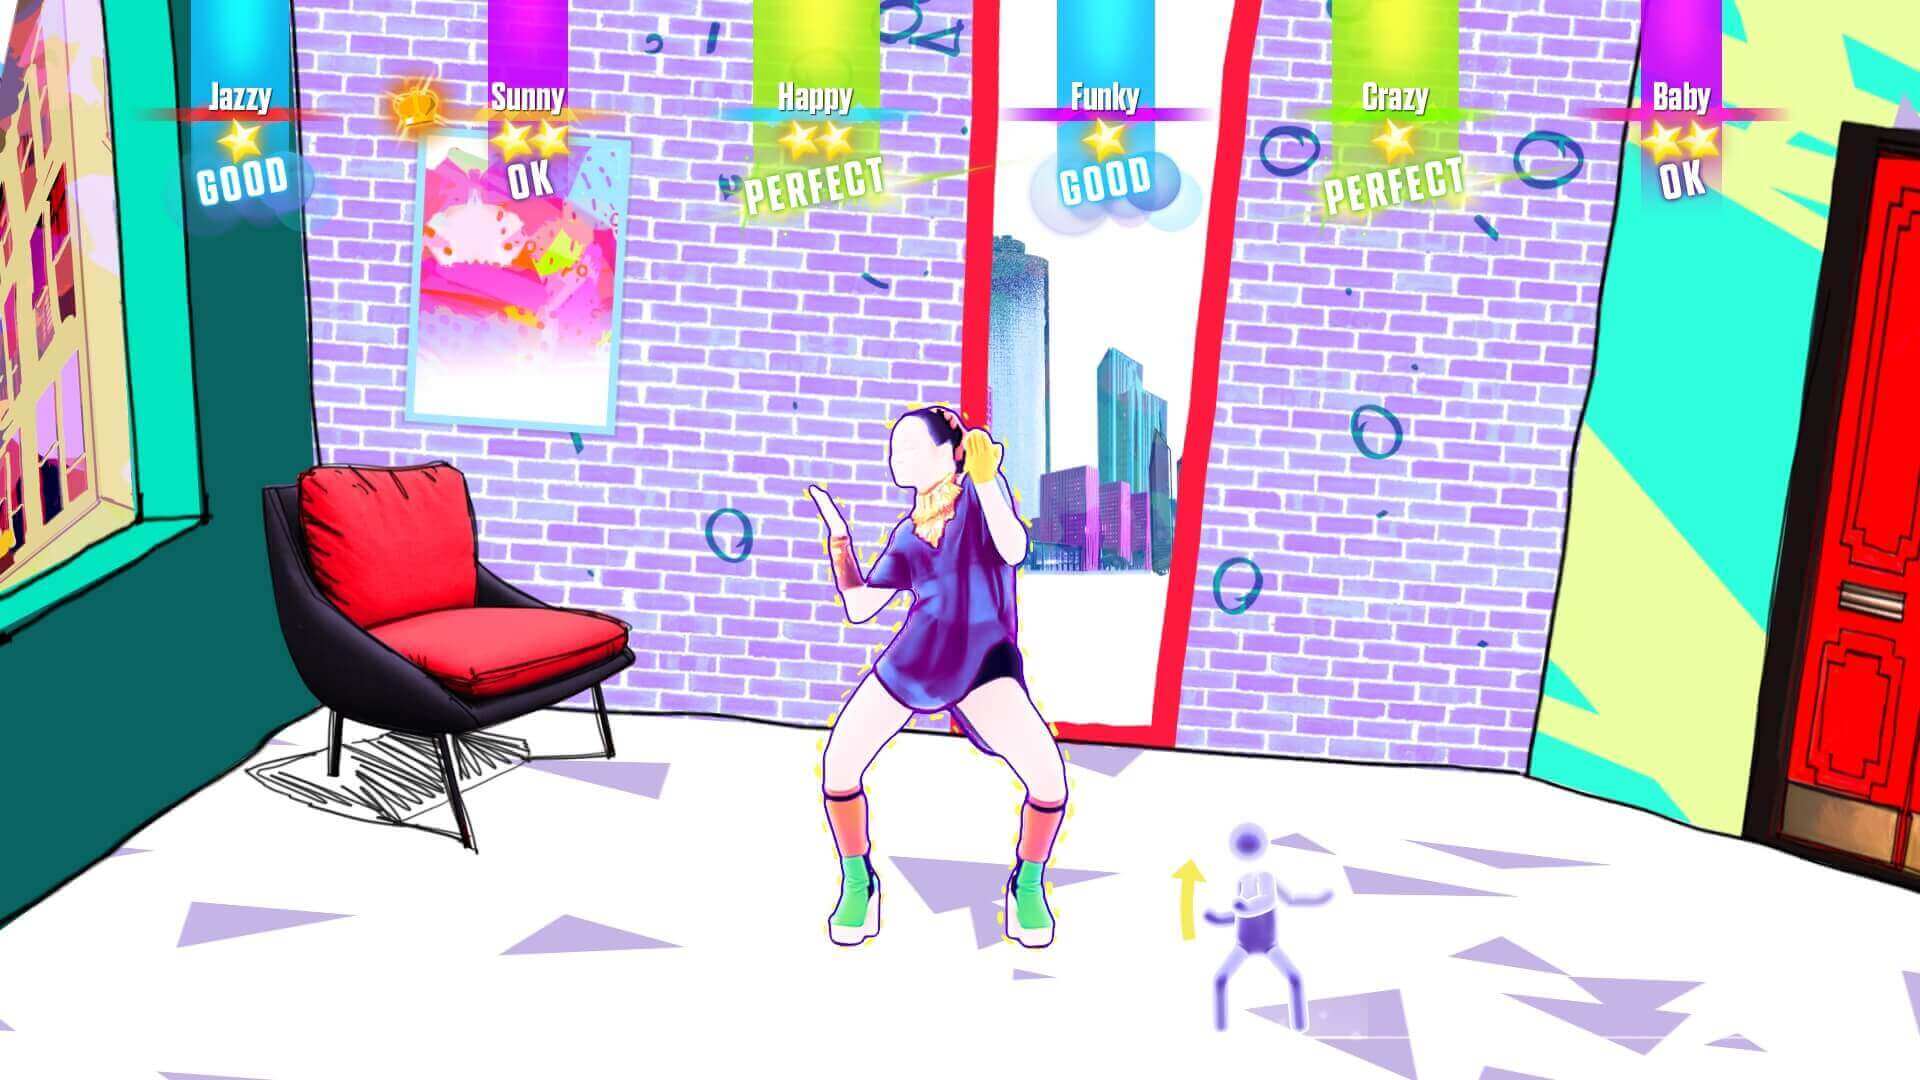 Just Dance 2017 download free